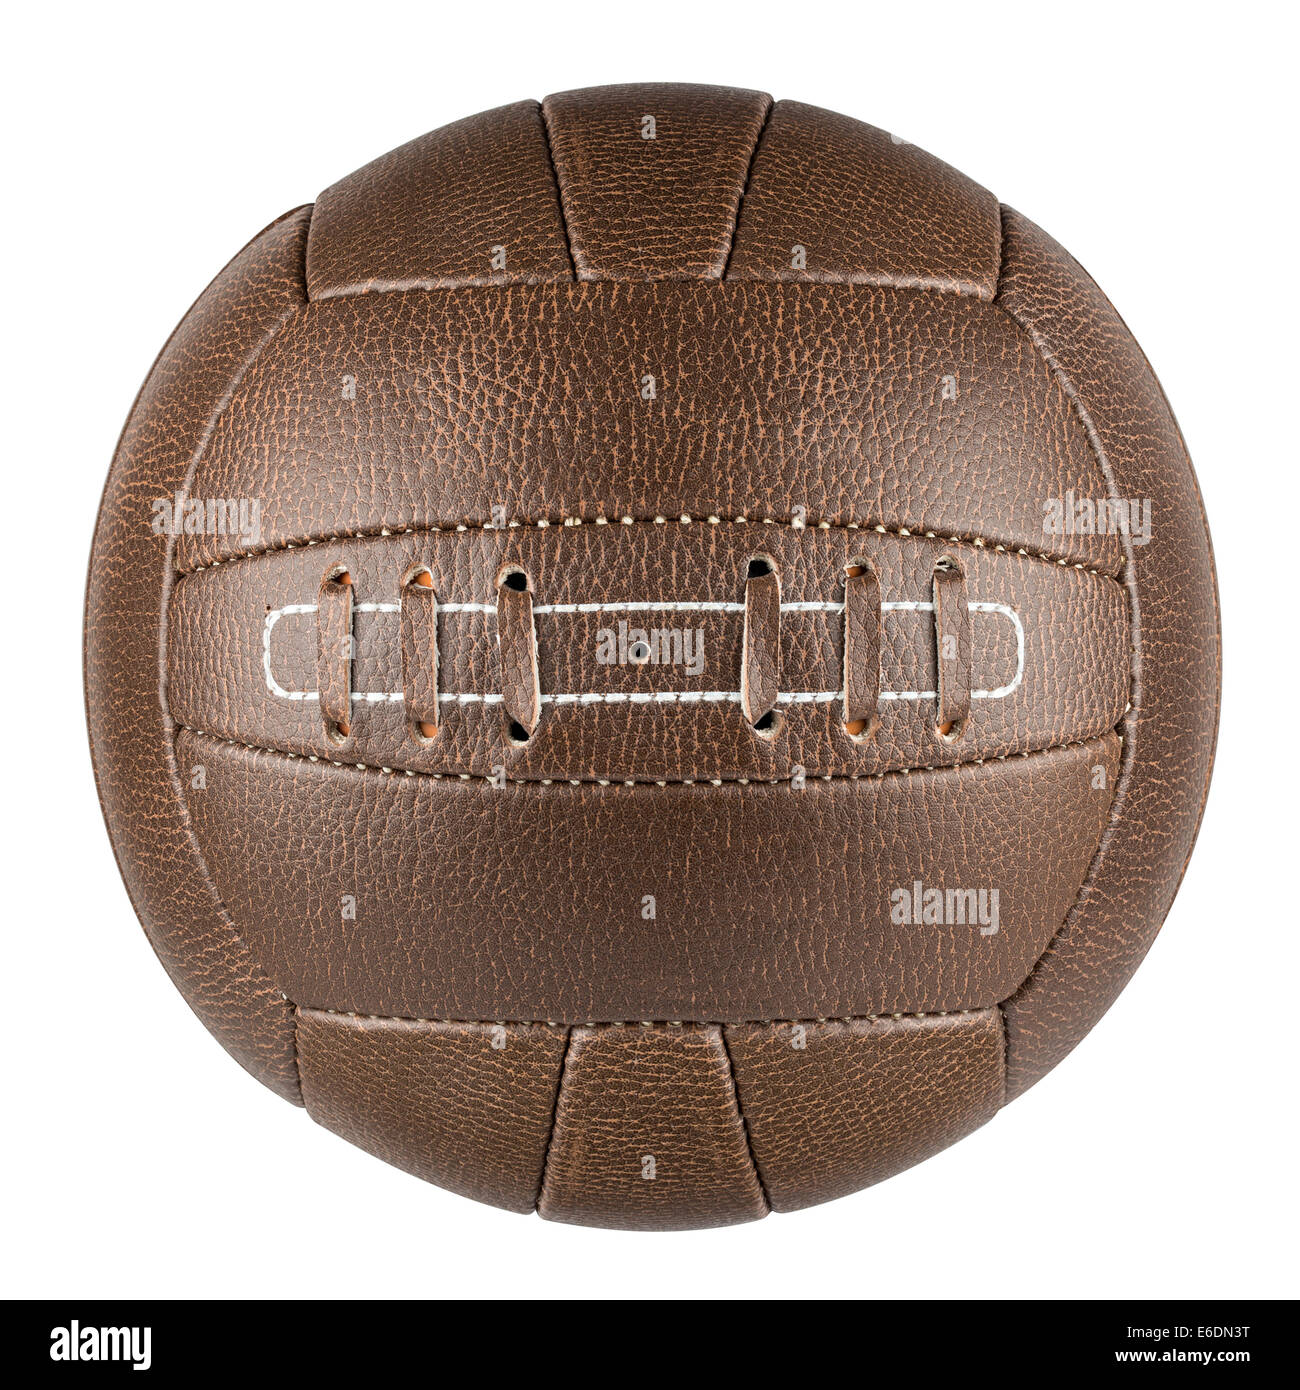 brown leather traditional soccer ball on white background Stock Photo